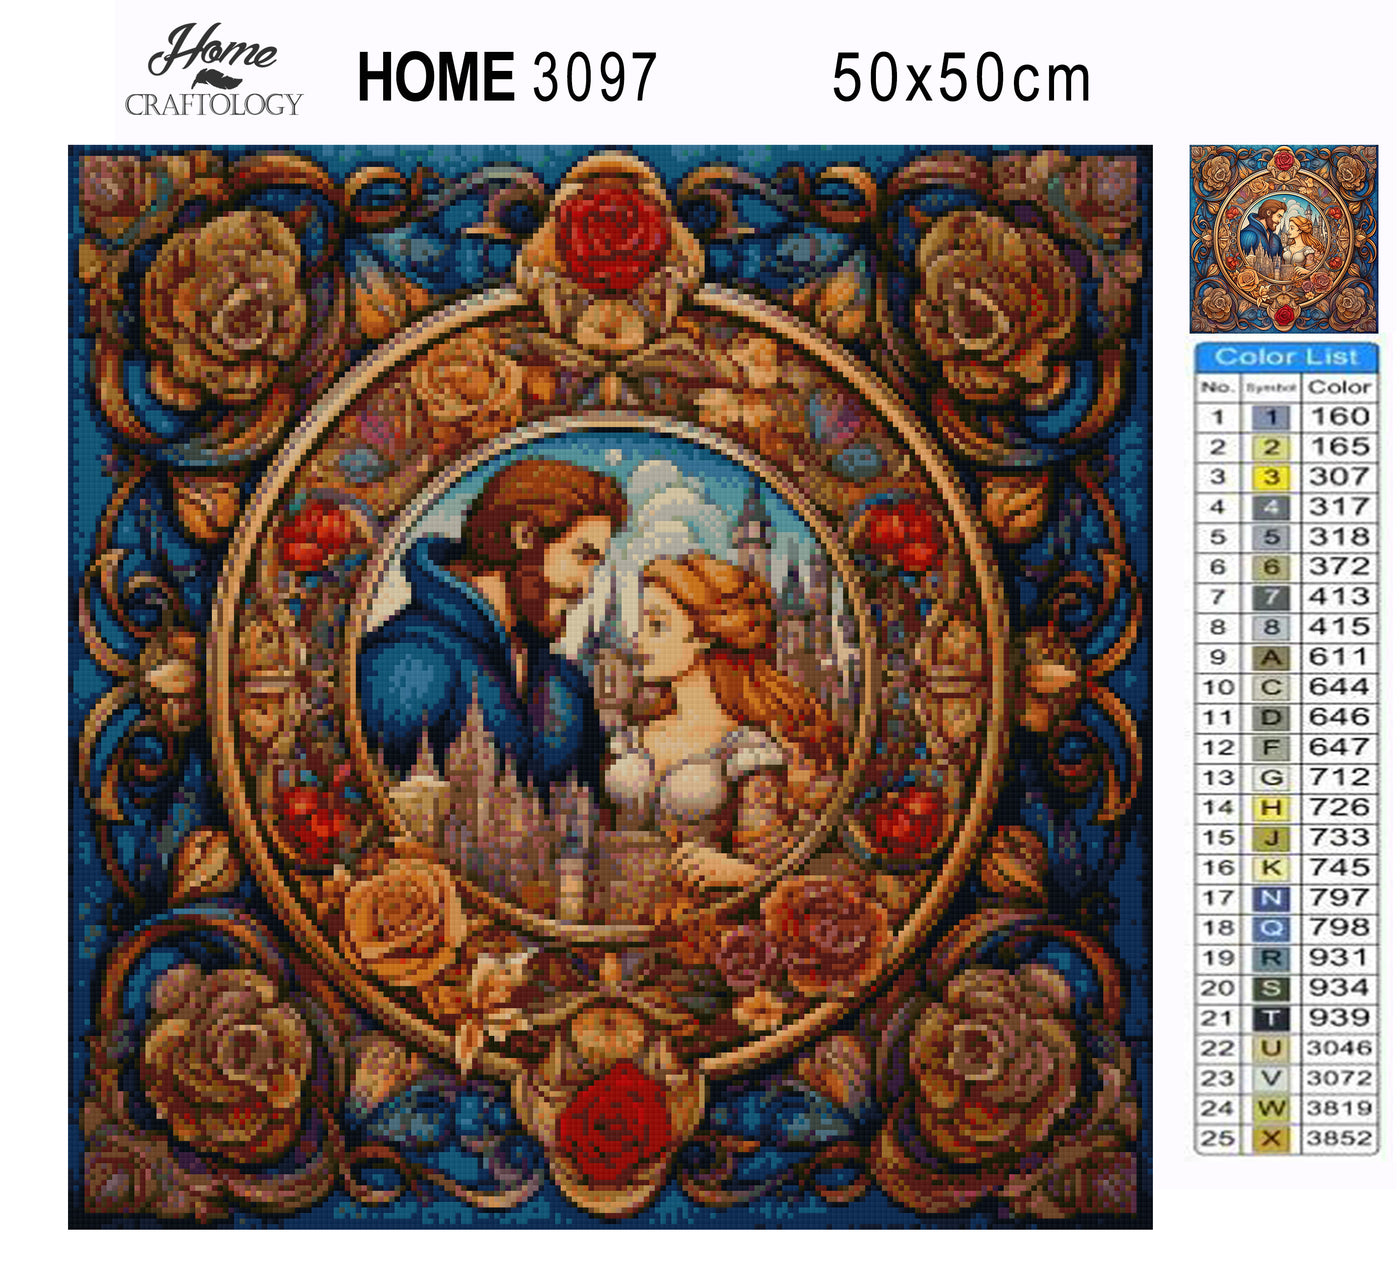 King and Queen Castle - Premium Diamond Painting Kit